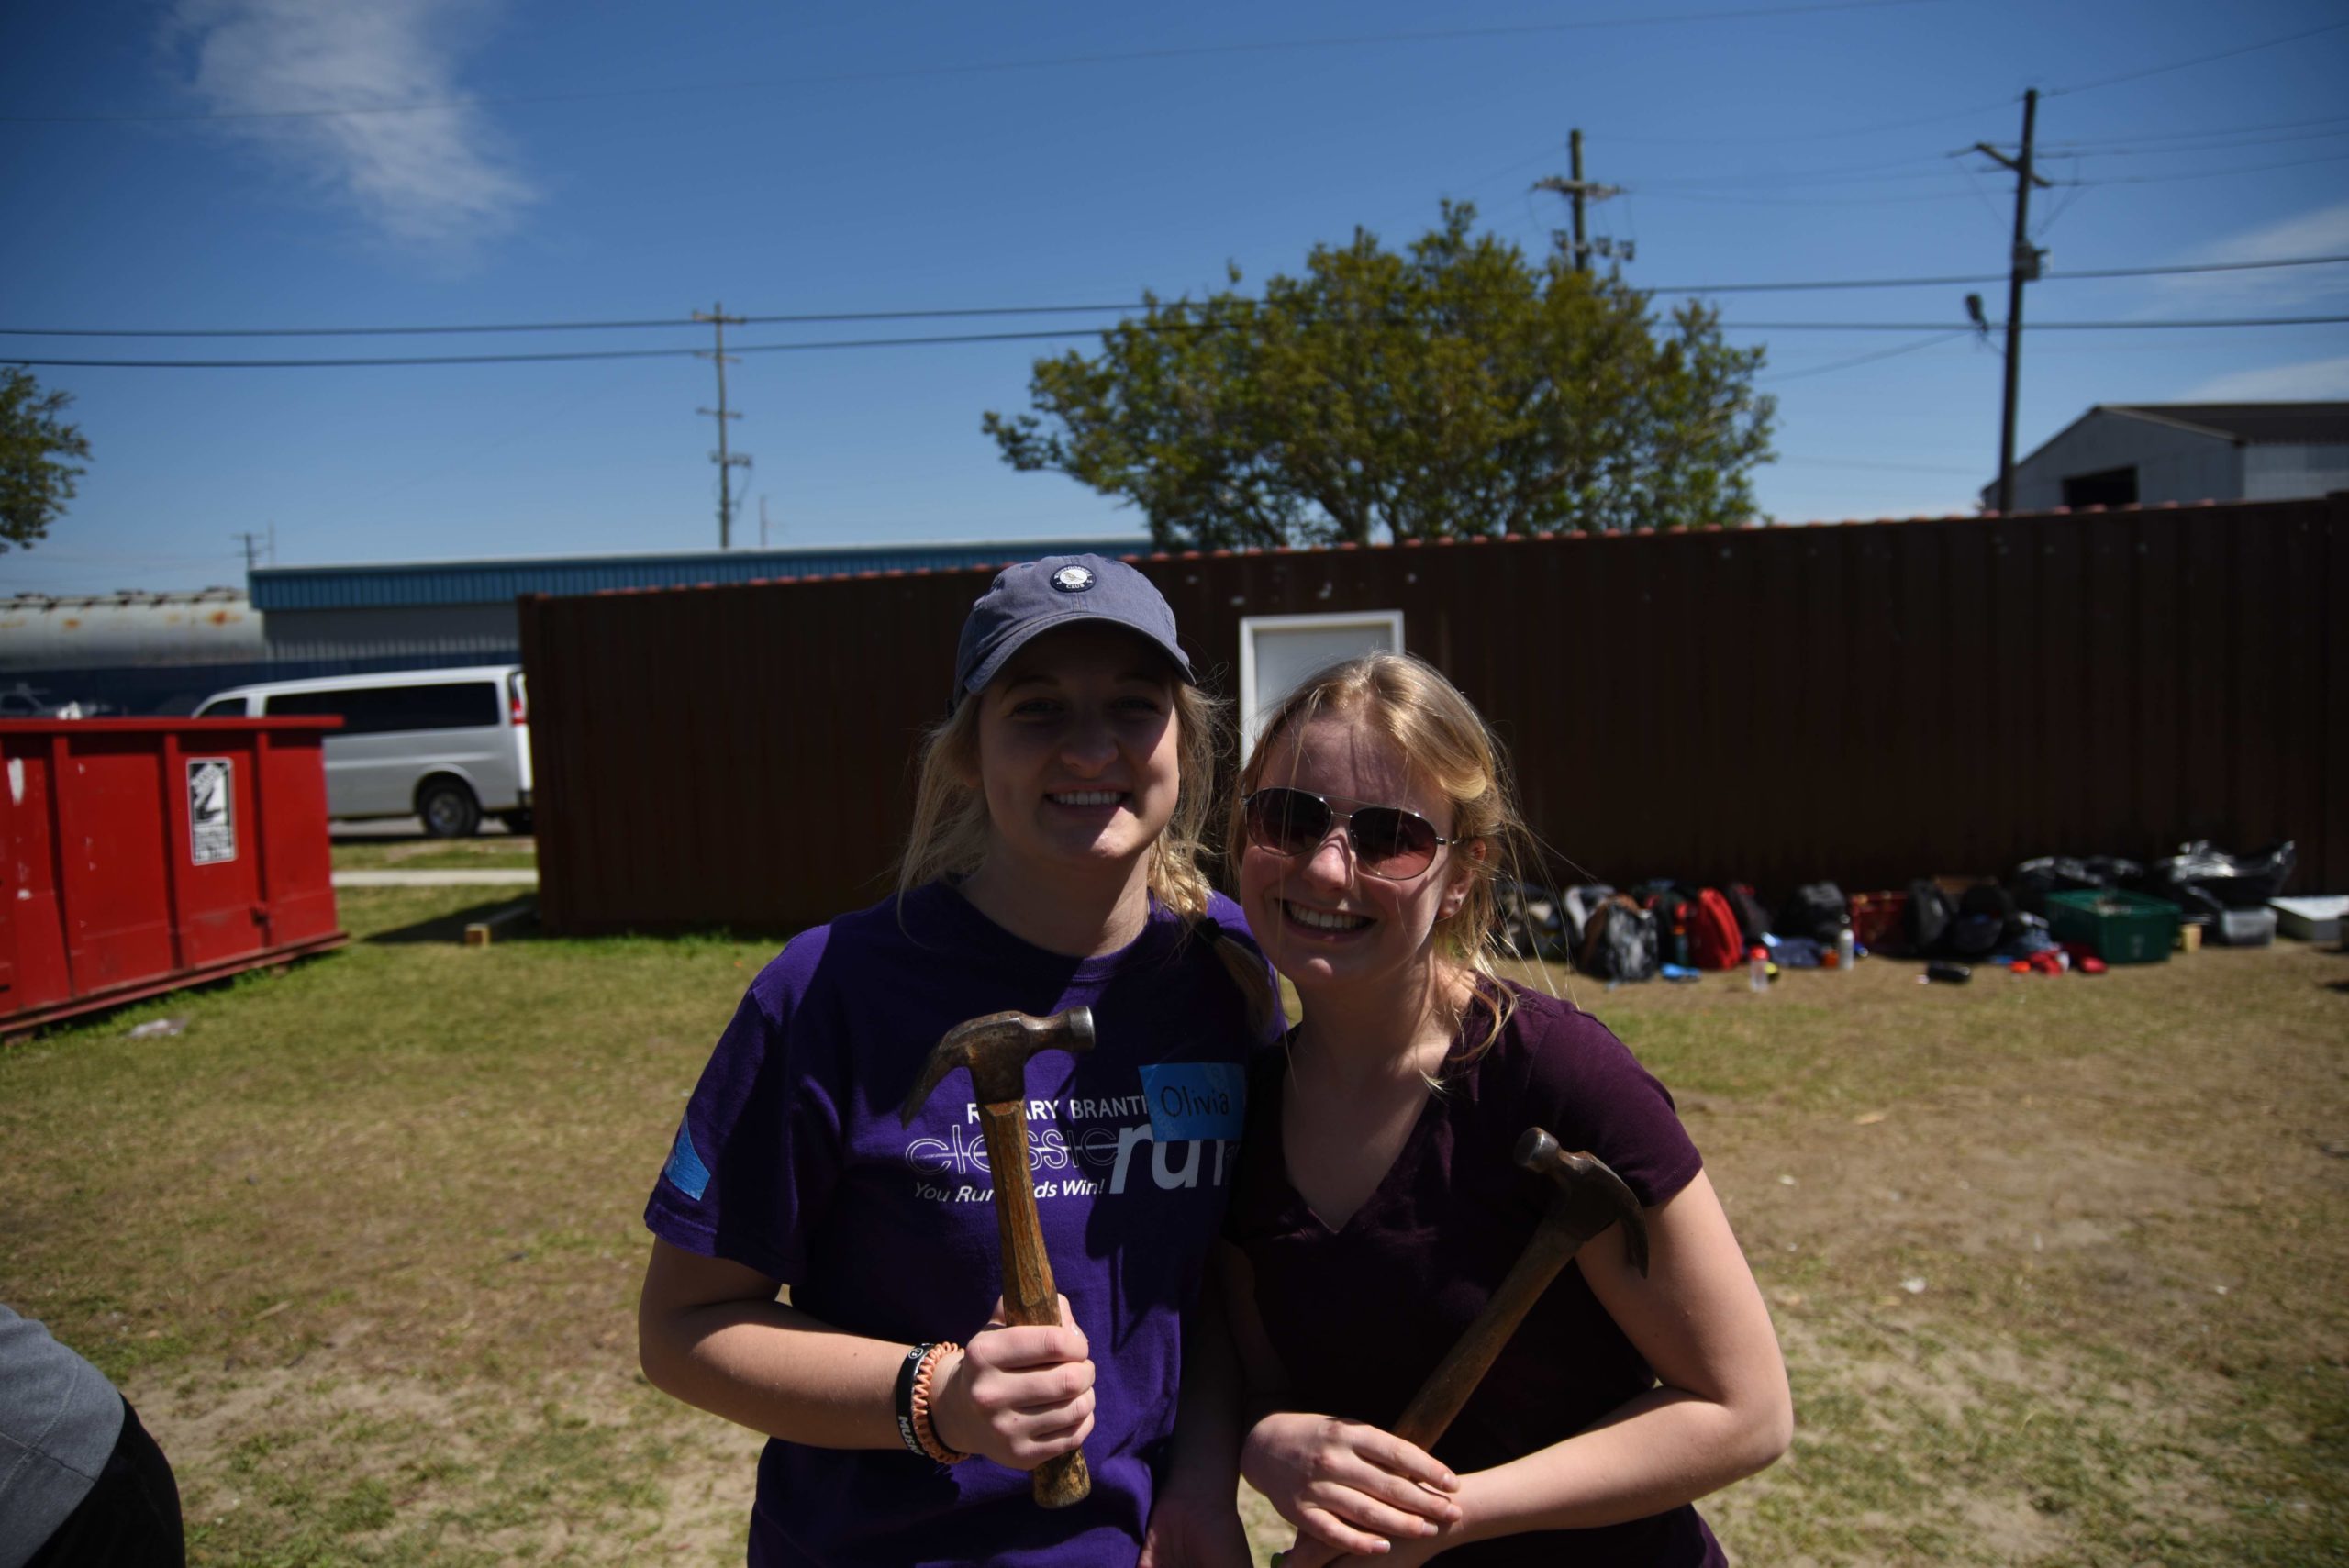 Two people wearing purple t-shirts smile at the camera while holding hammers